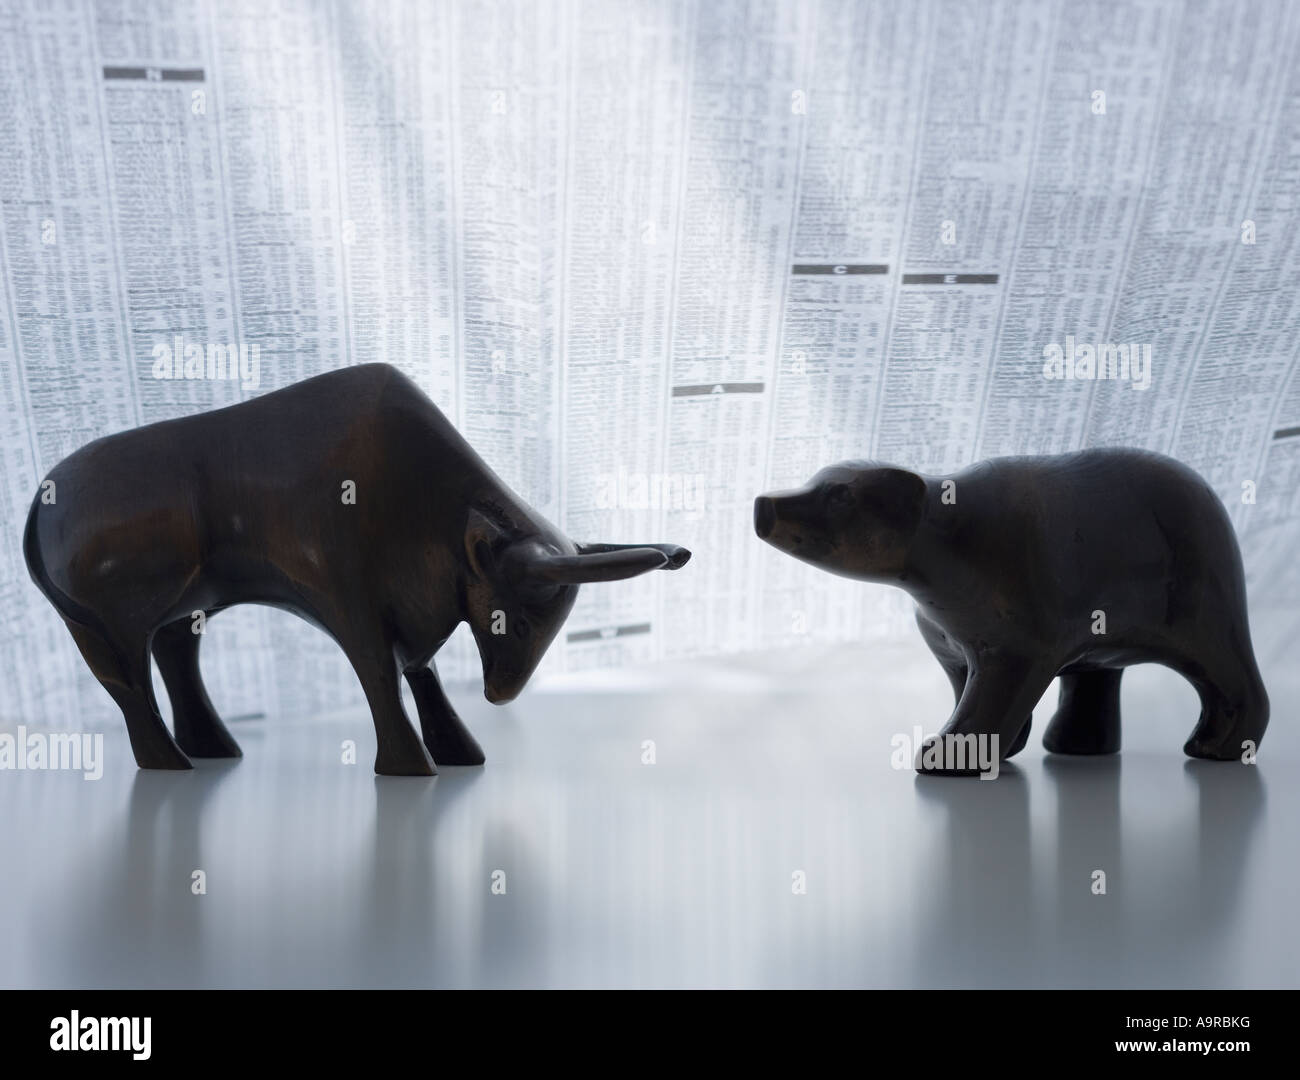 Bear and bull figurines facing each other Stock Photo